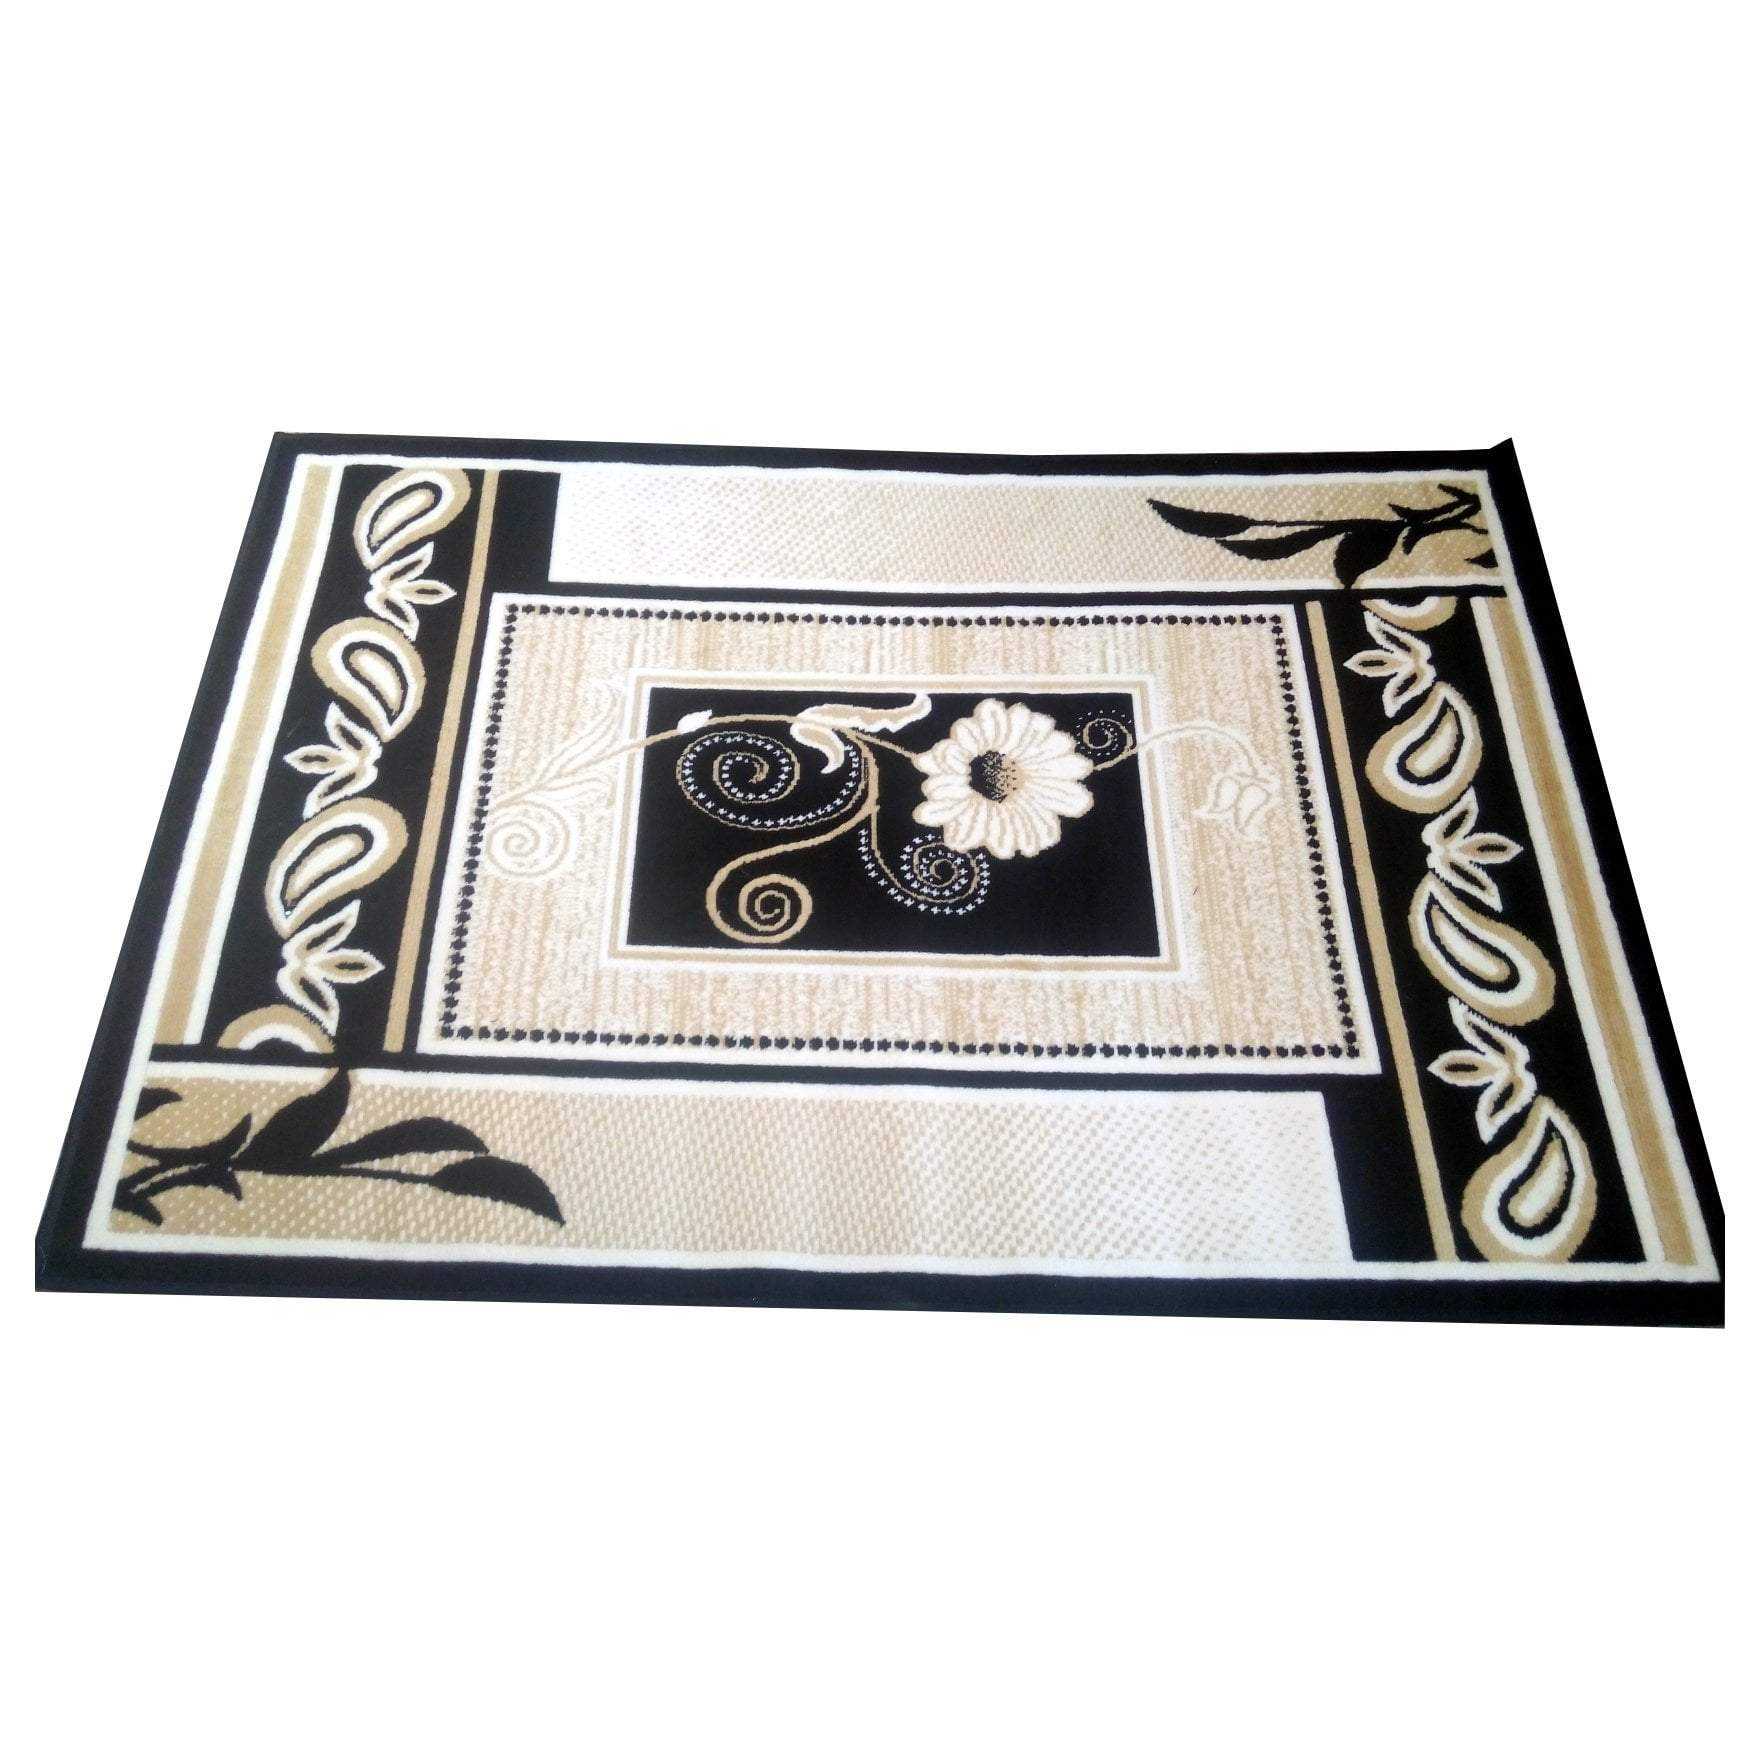 Centre Rug - 50131 Black Feather Series